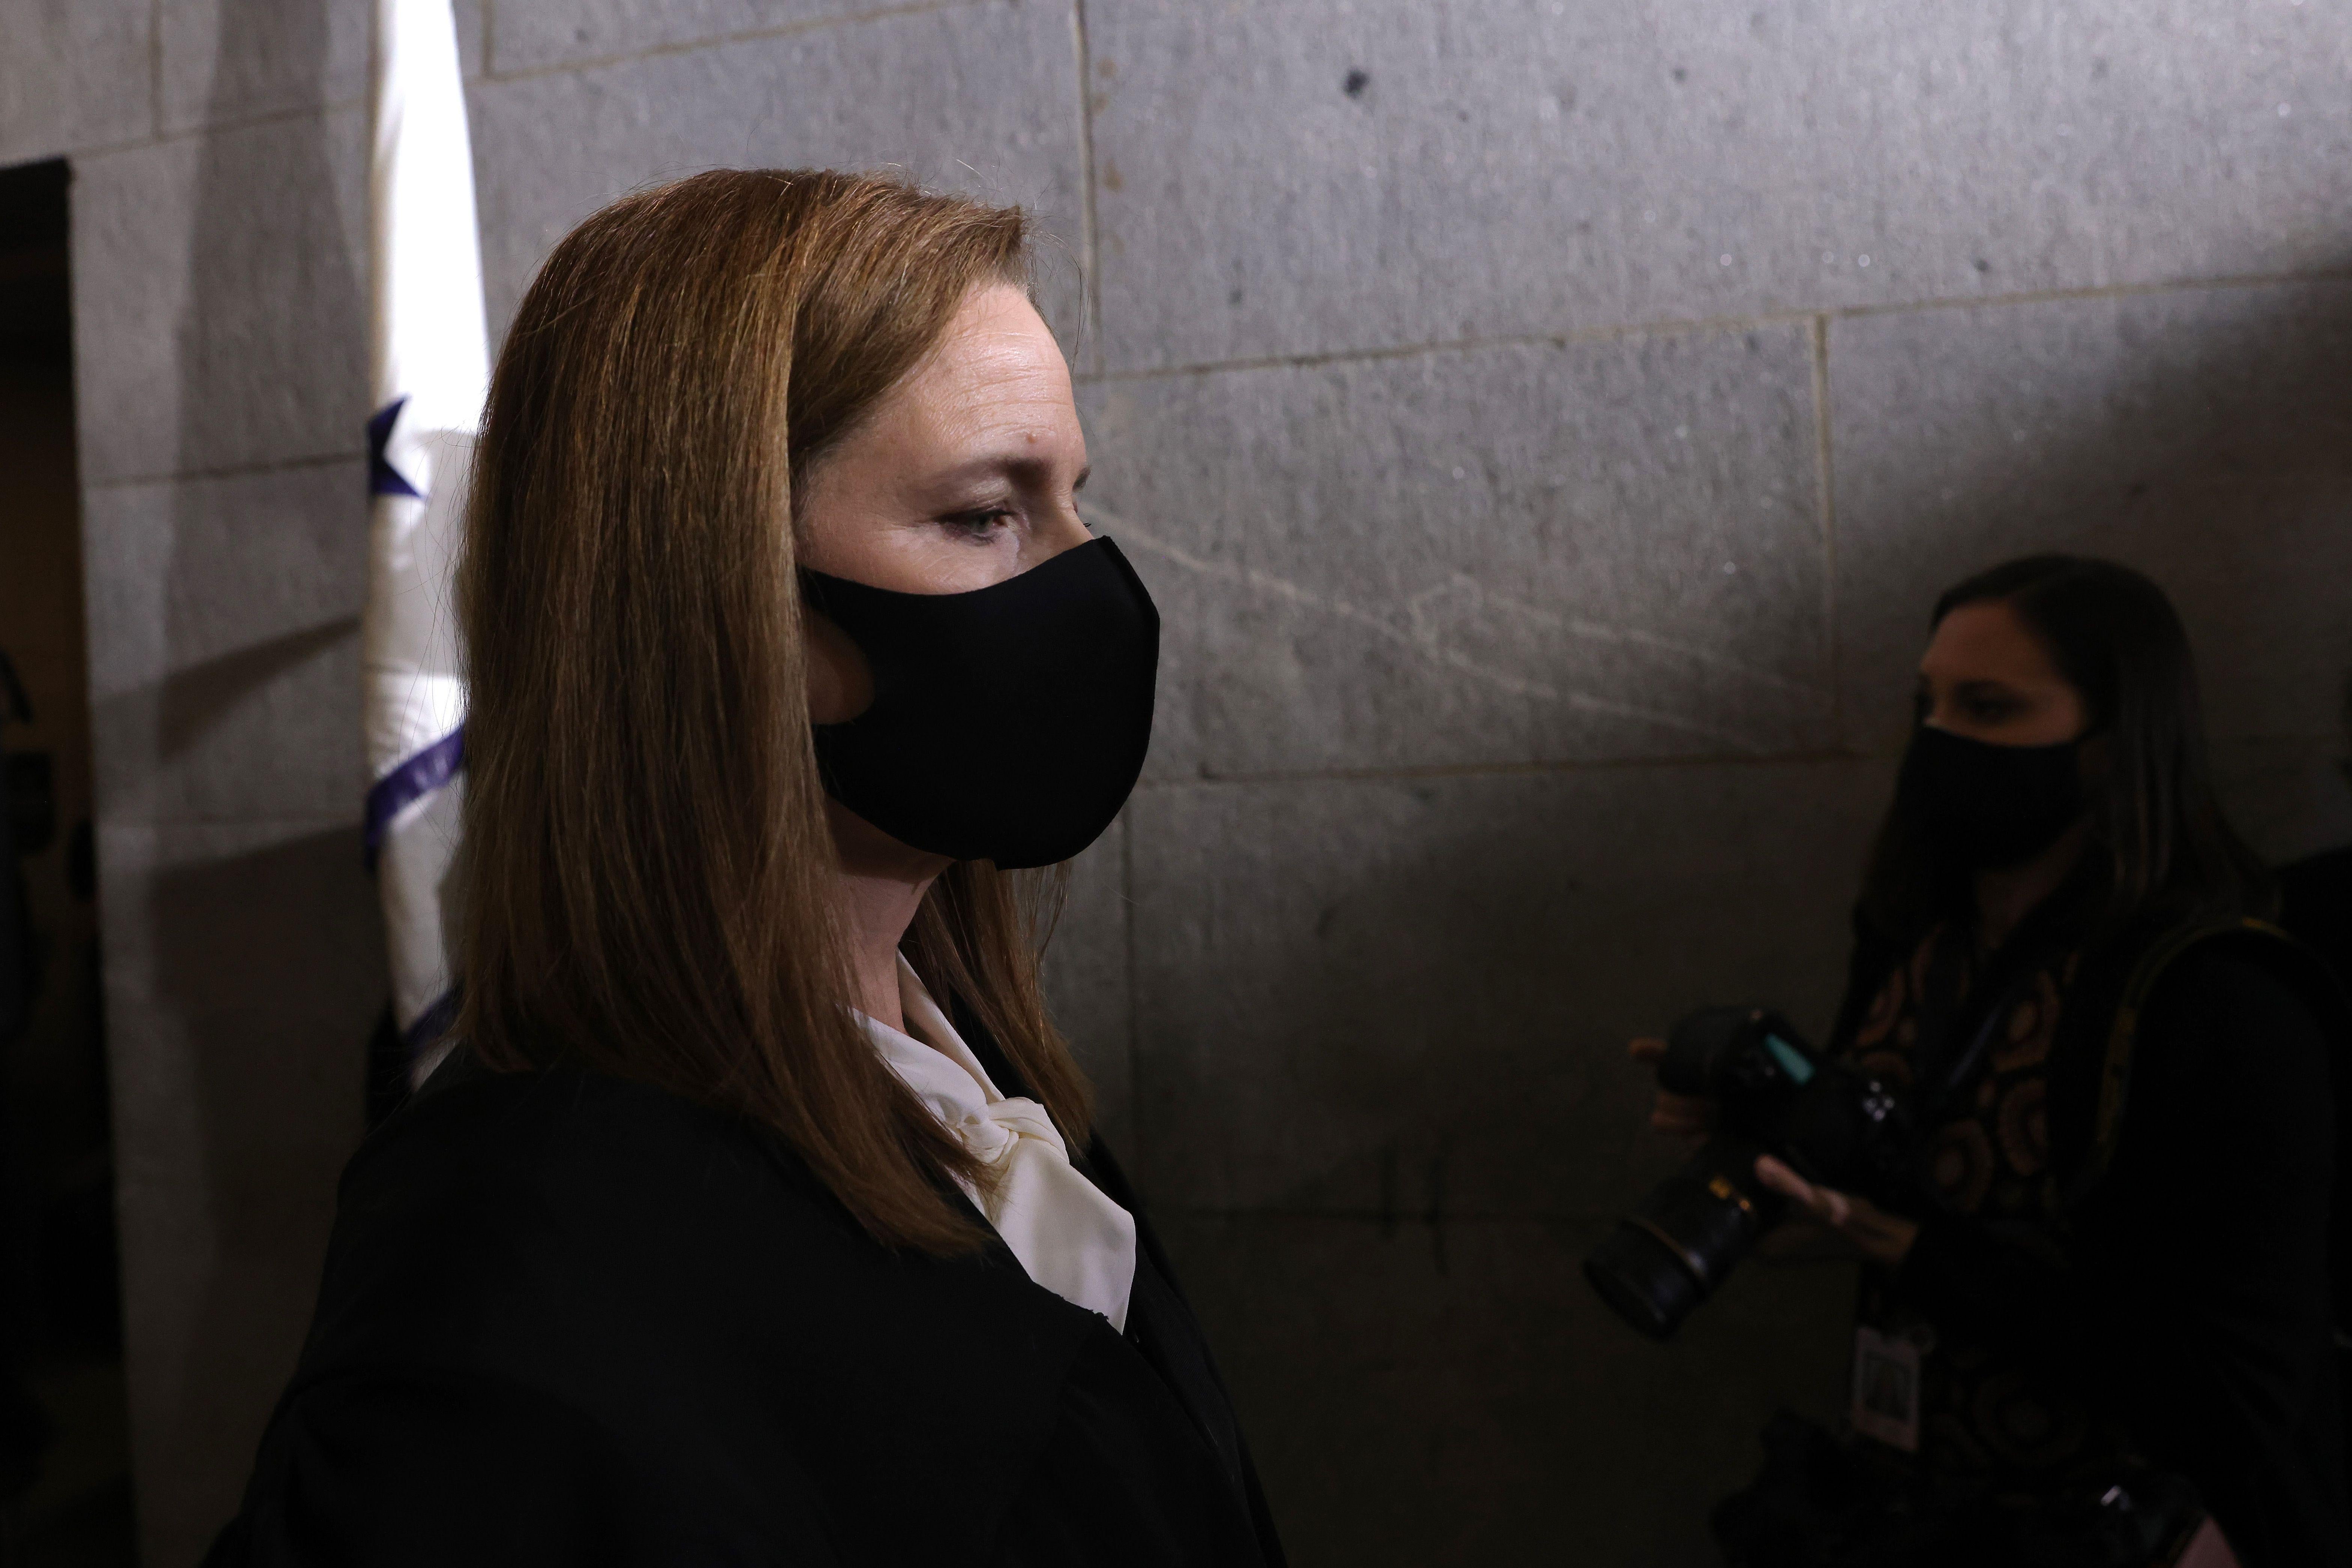 Amy Coney Barrett at Joe Biden's inauguration, in judicial robes and wearing a mask.